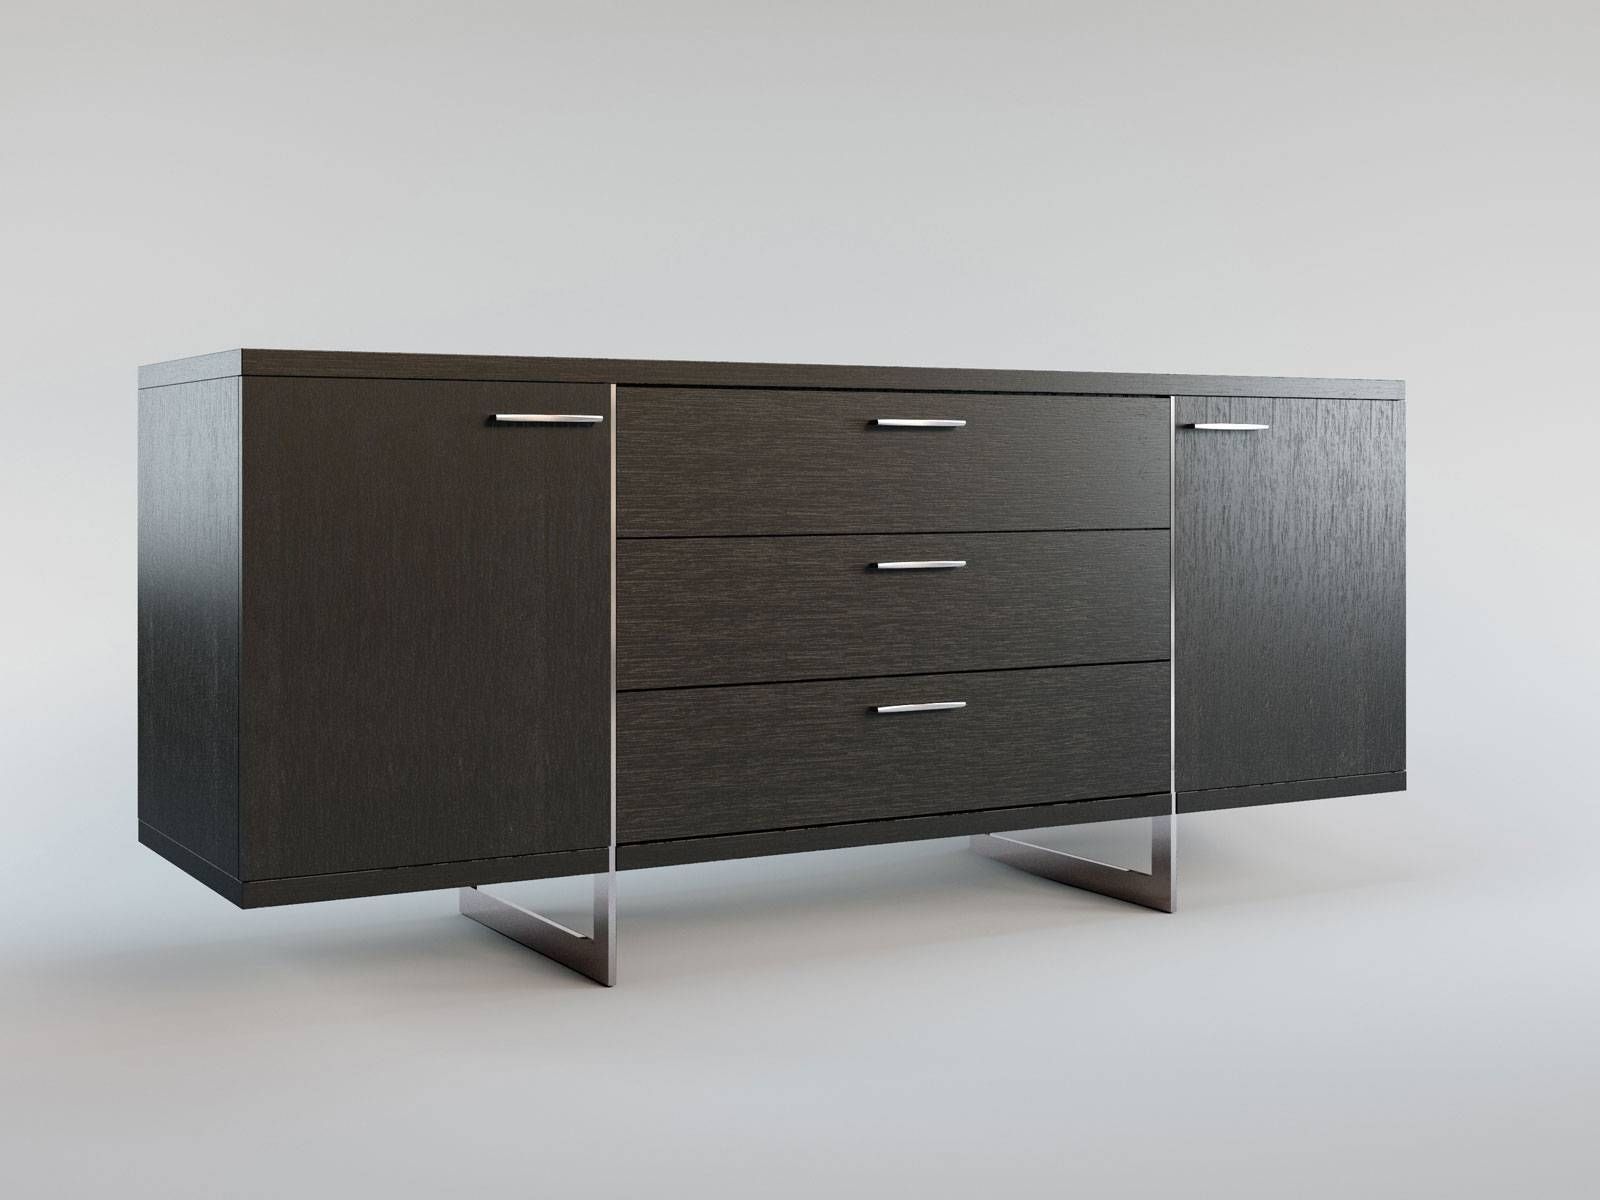 Contemporary Sideboard Buffet With Three Storage Drawers Tulsa With Regard To Contemporary Sideboard Cabinet (View 5 of 20)